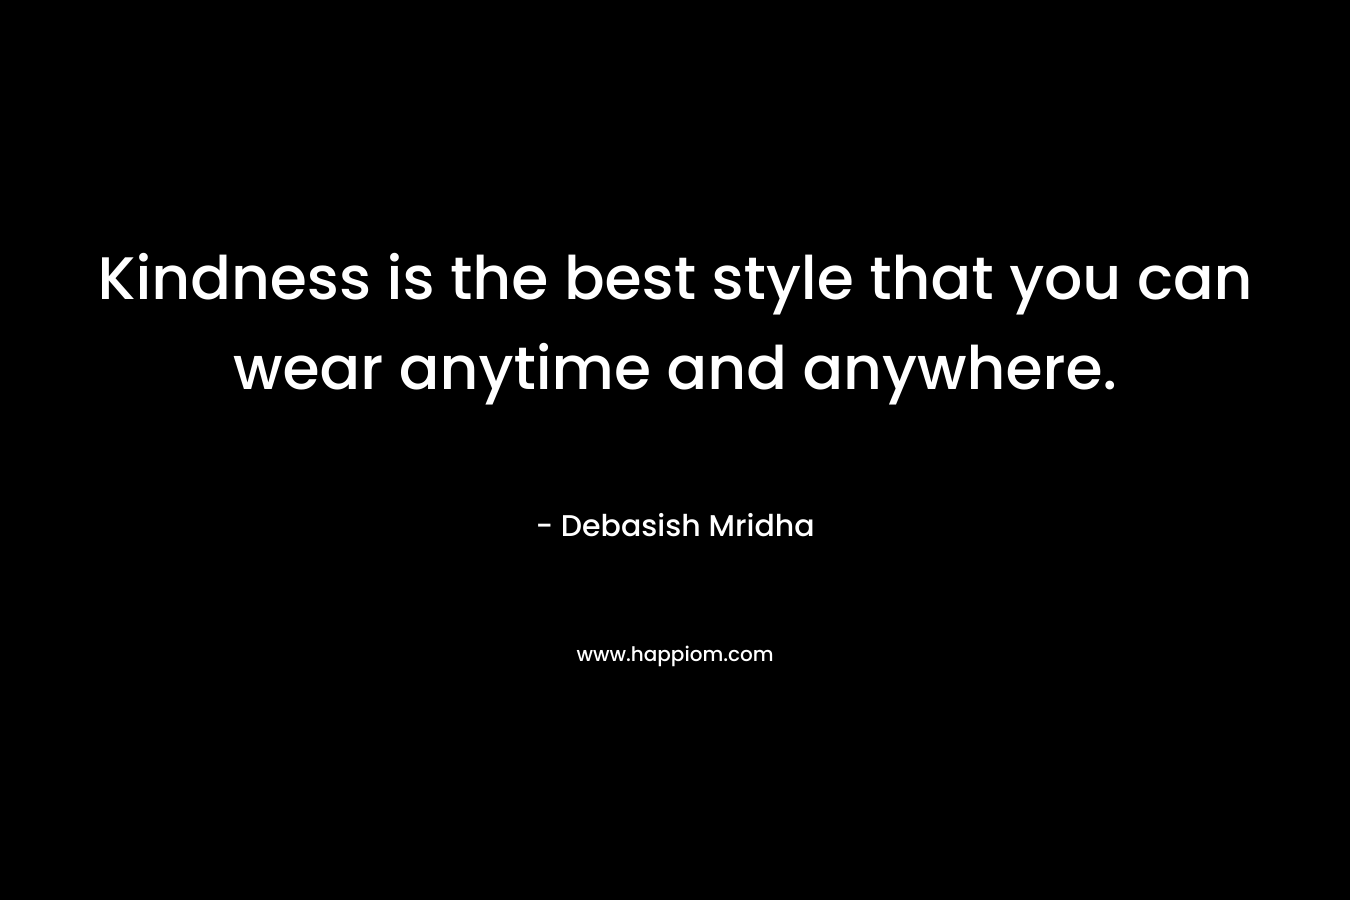 Kindness is the best style that you can wear anytime and anywhere. – Debasish Mridha